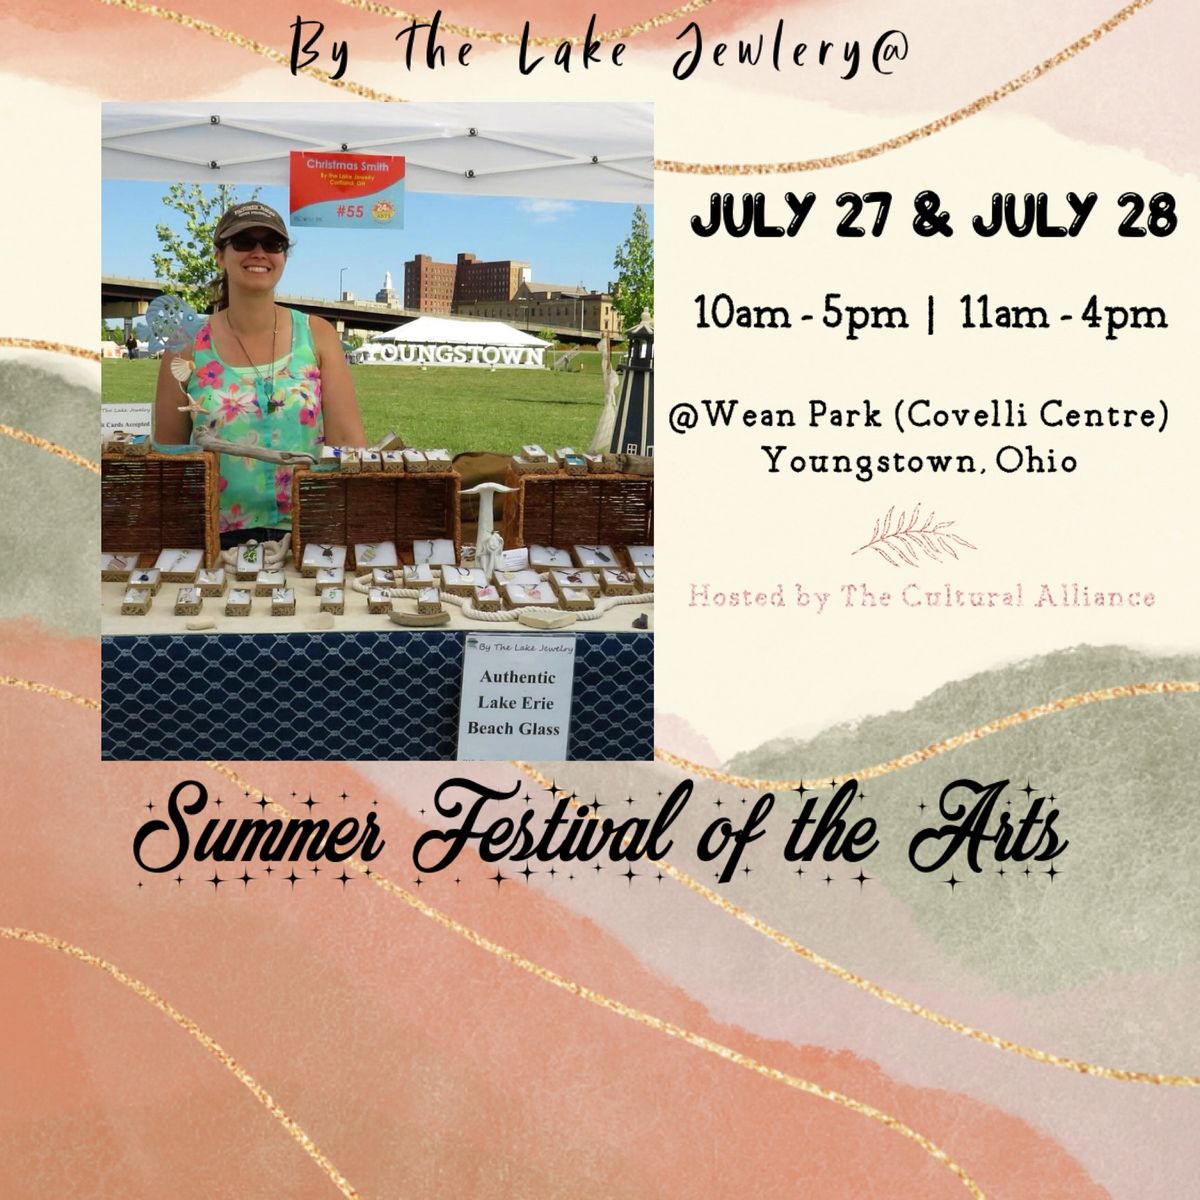 Summer of the Arts Festival (7\/27 & 7\/28) ~ Artist: By The Lake Jewelry